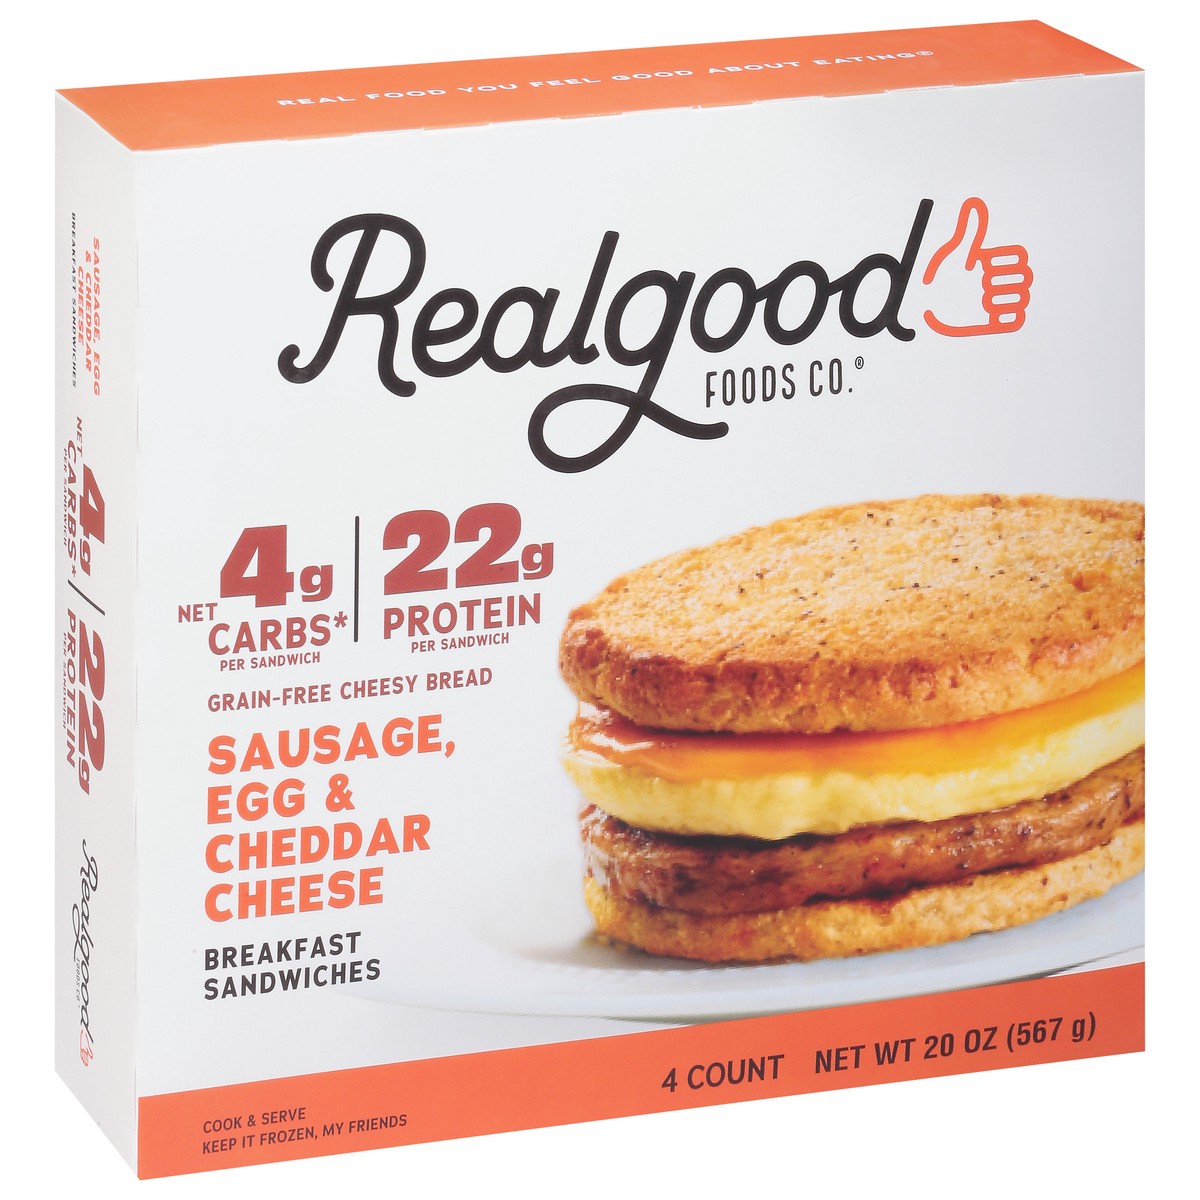 slide 2 of 9, Realgood Foods Co. Sausage Egg & Cheddar Cheese Breakfast Sandwiches 4 ea, 4 ct